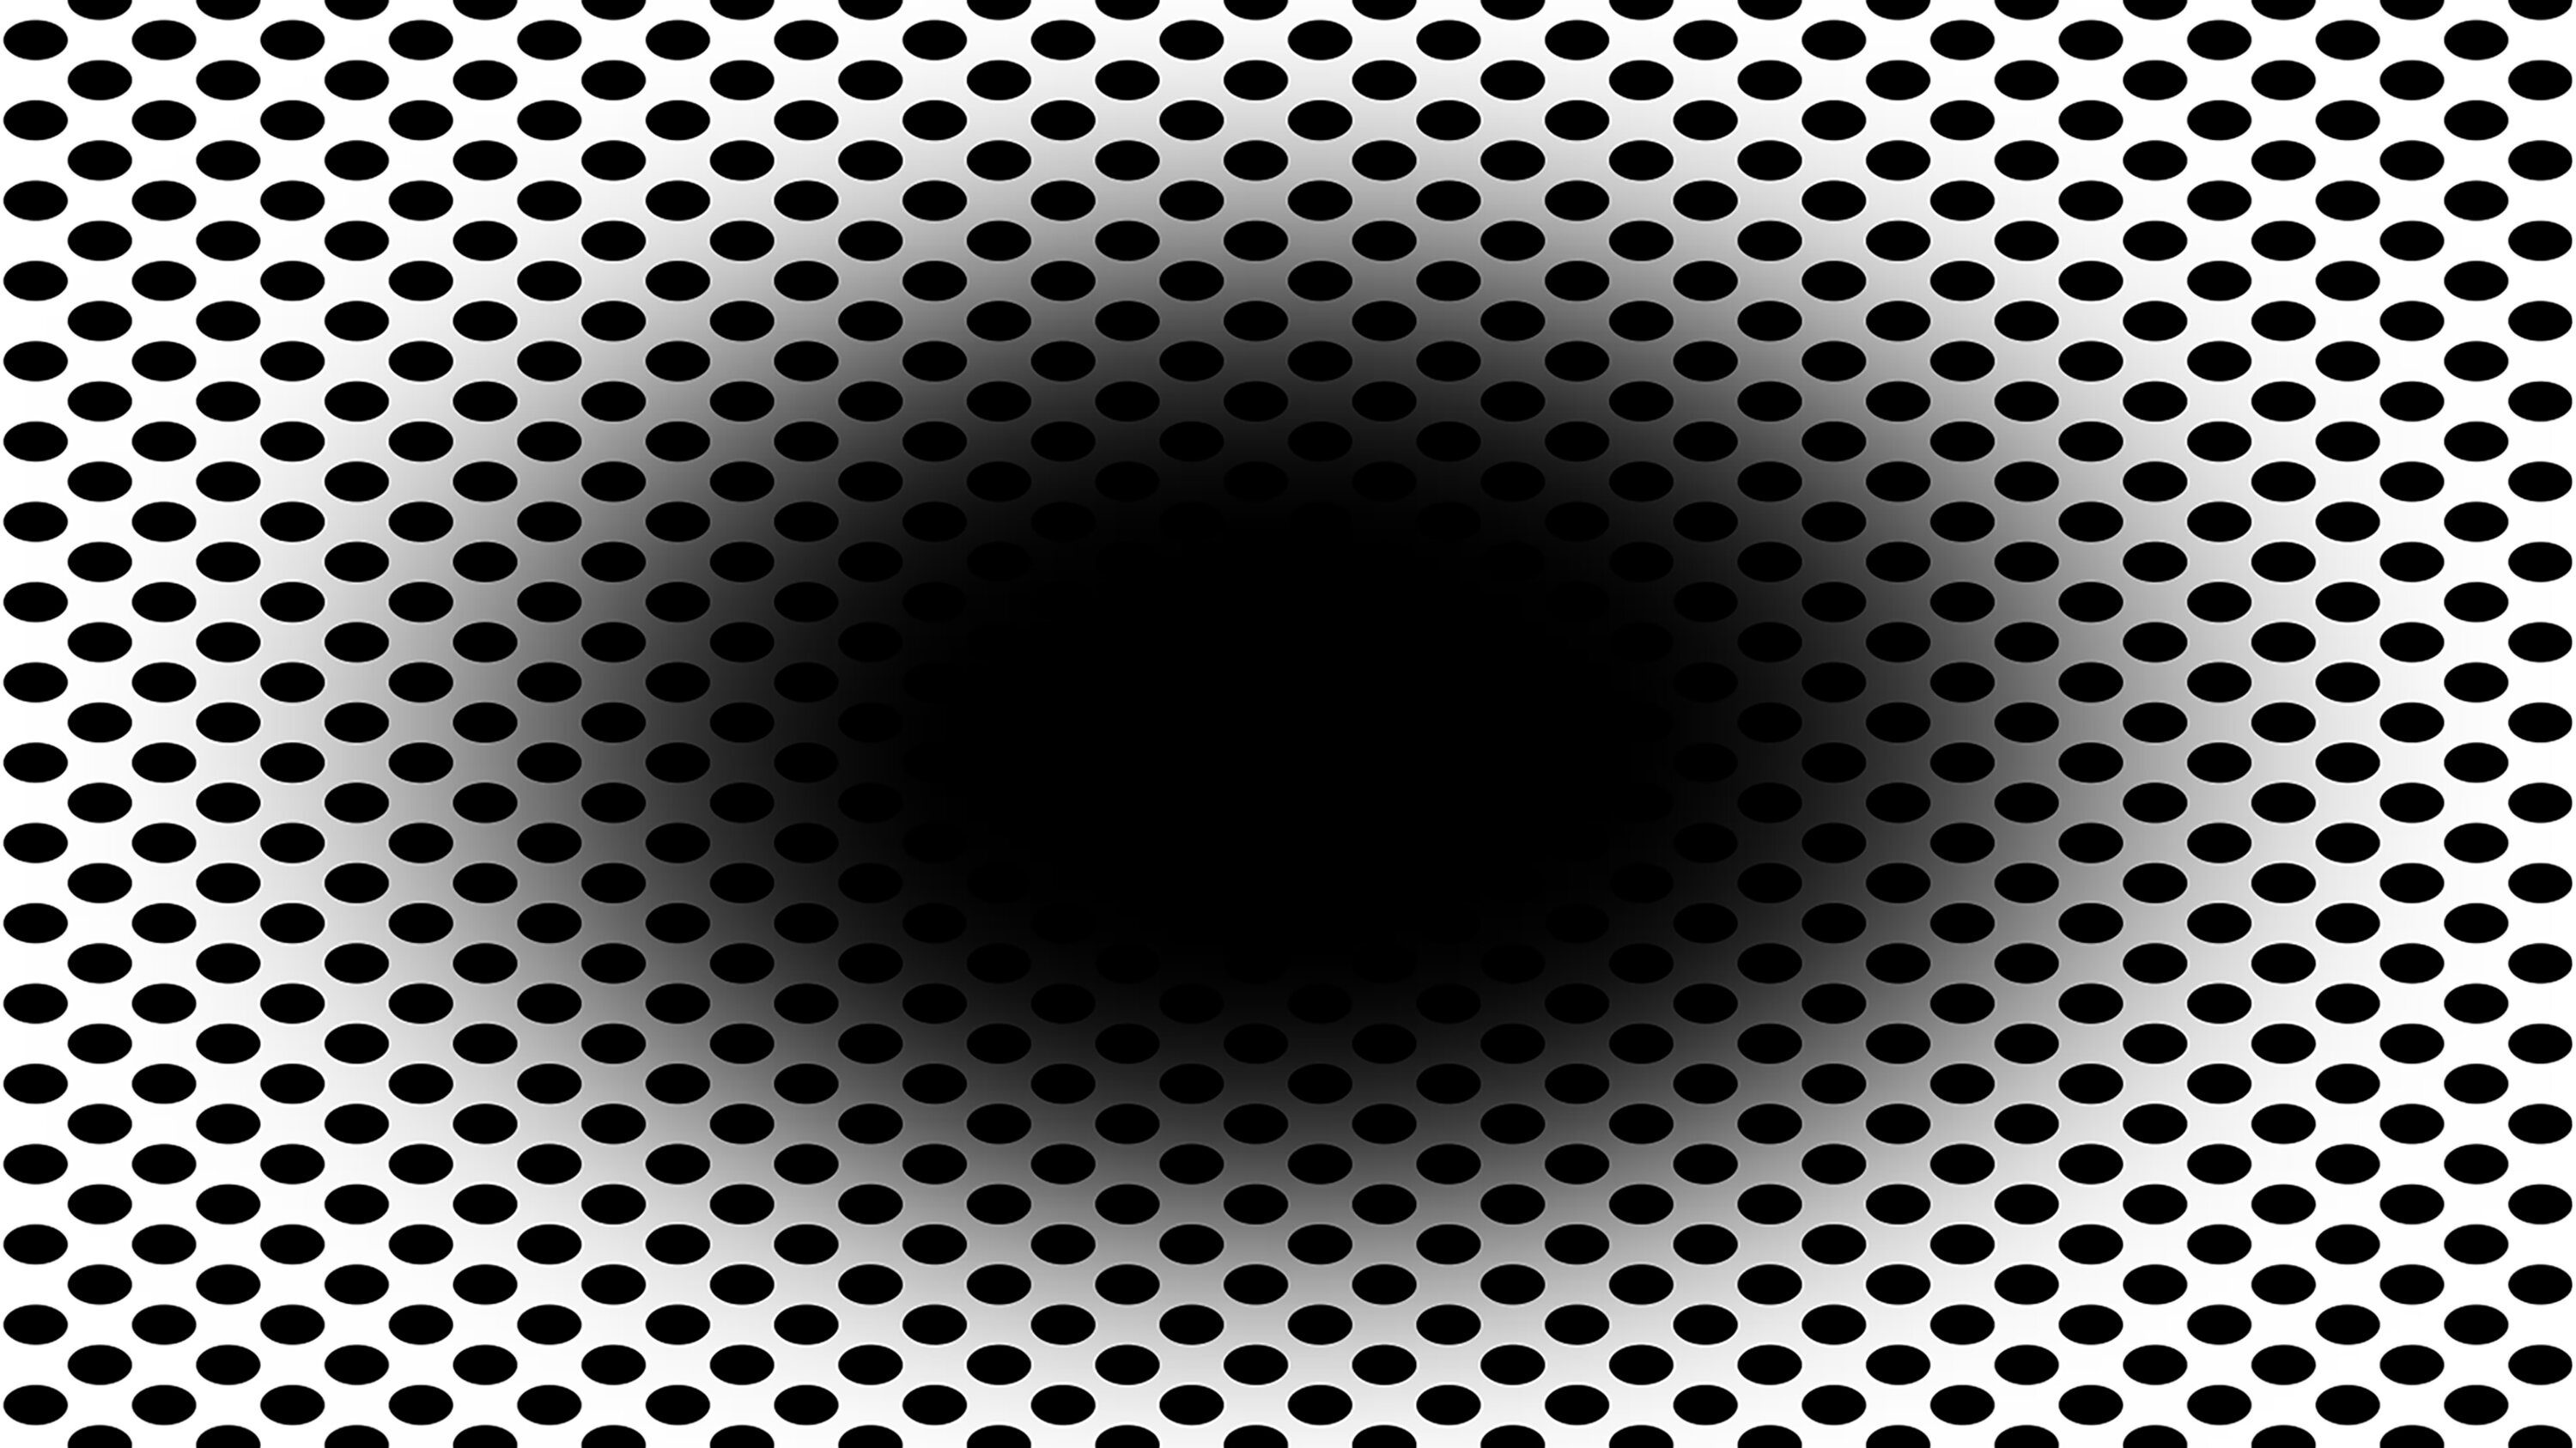 Optical illusion, Brain and eyes, New York Times article, Mind-bending, 3000x1690 HD Desktop